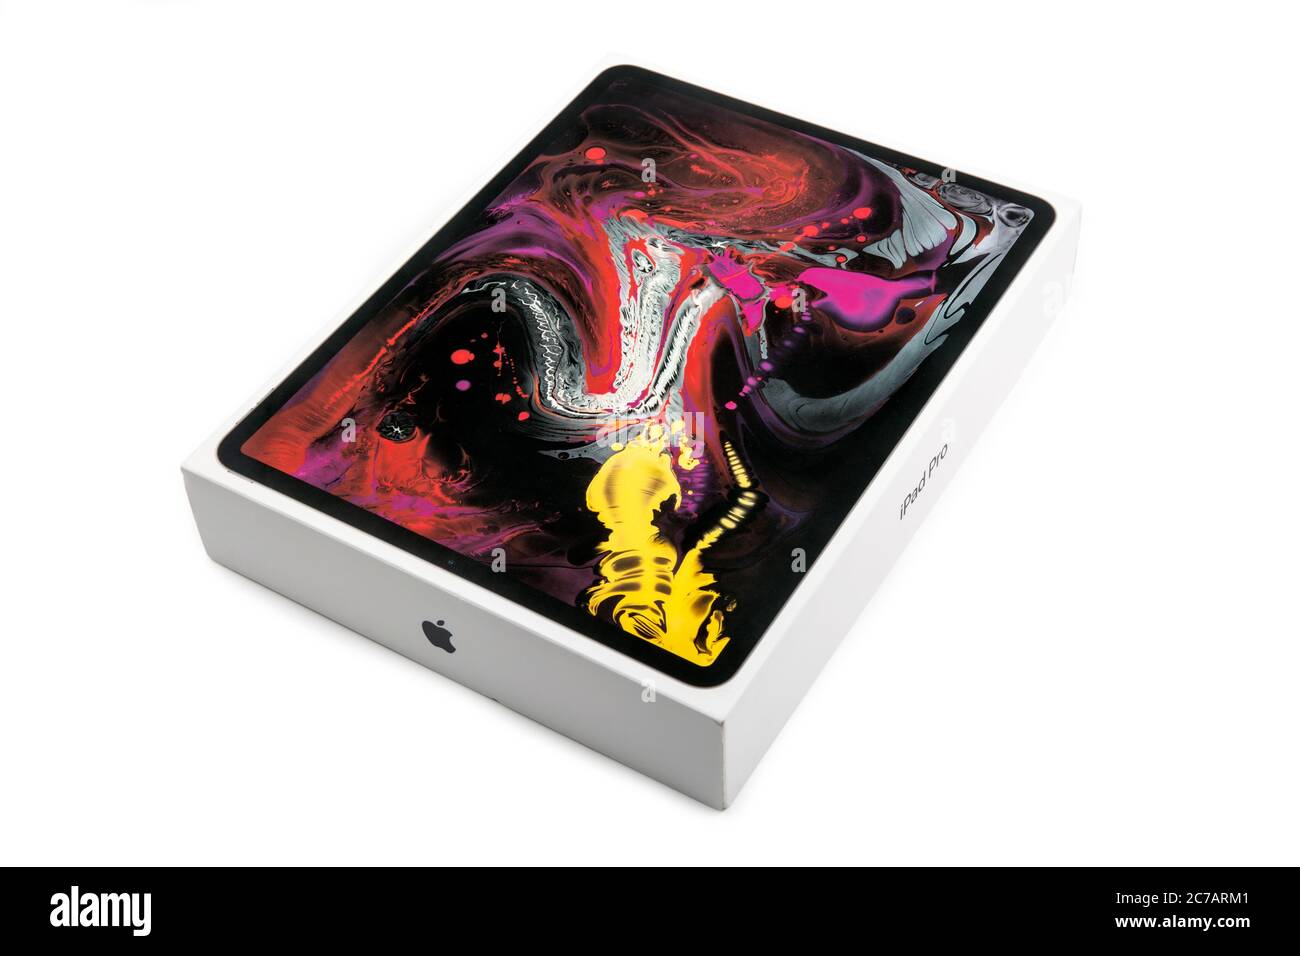 WETZLAR, GERMANY - 2020-07-10: APPLE The iPad Pro is a tablet computer from  the iPad model line from Apple Stock Photo - Alamy